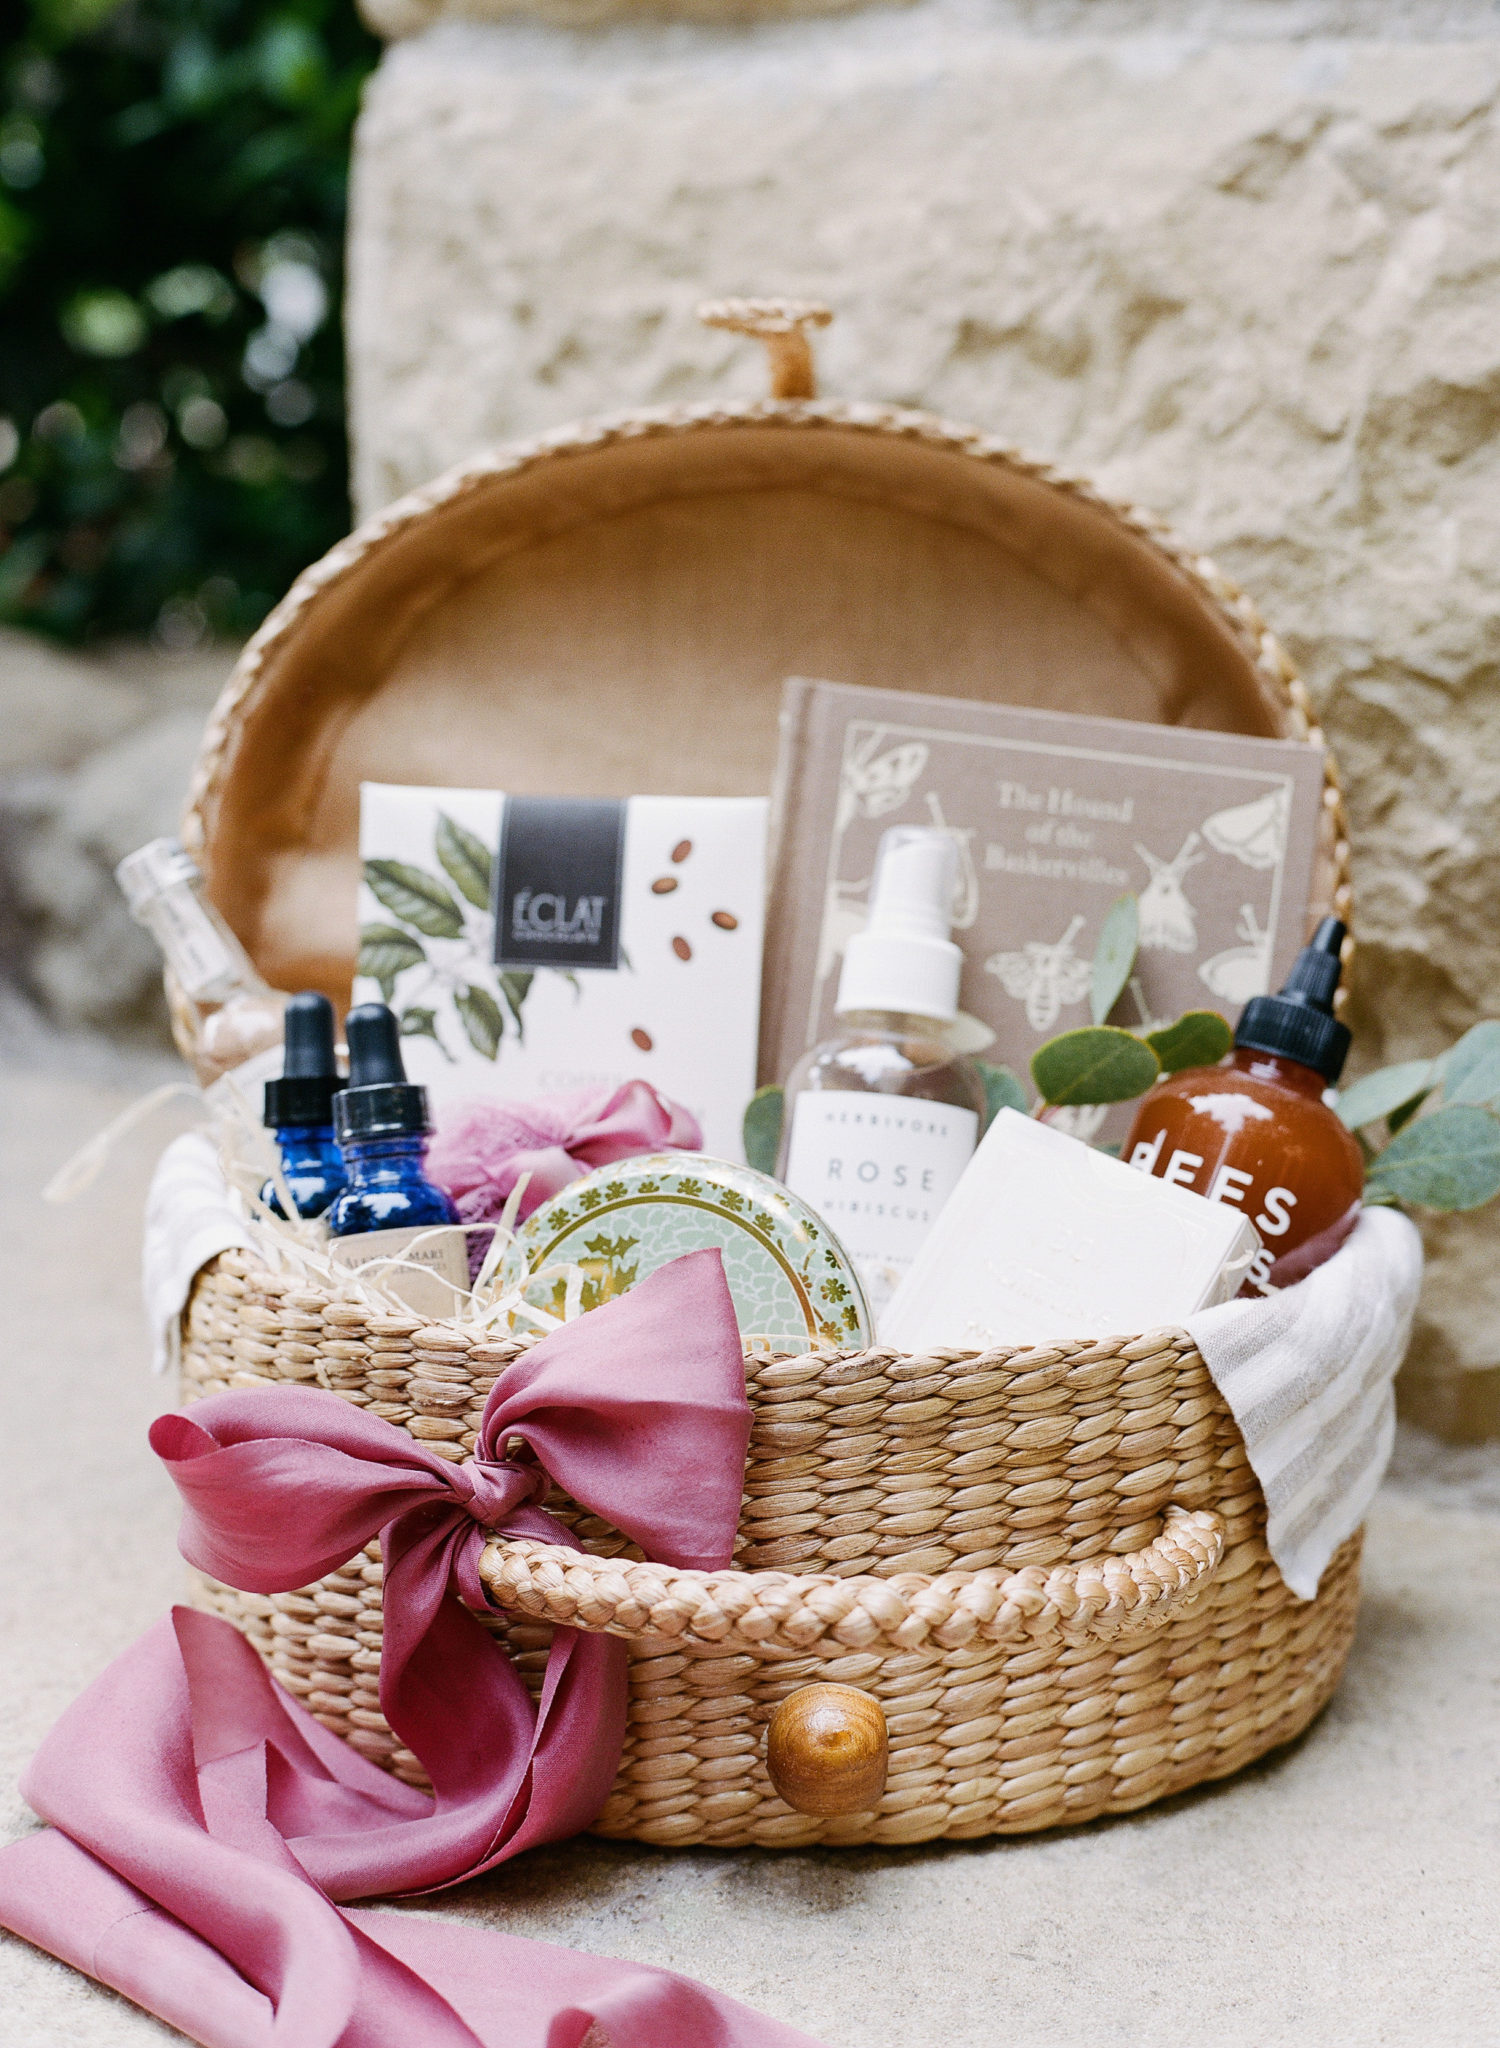 Curated Wedding Welcome Bag For Family & Guest